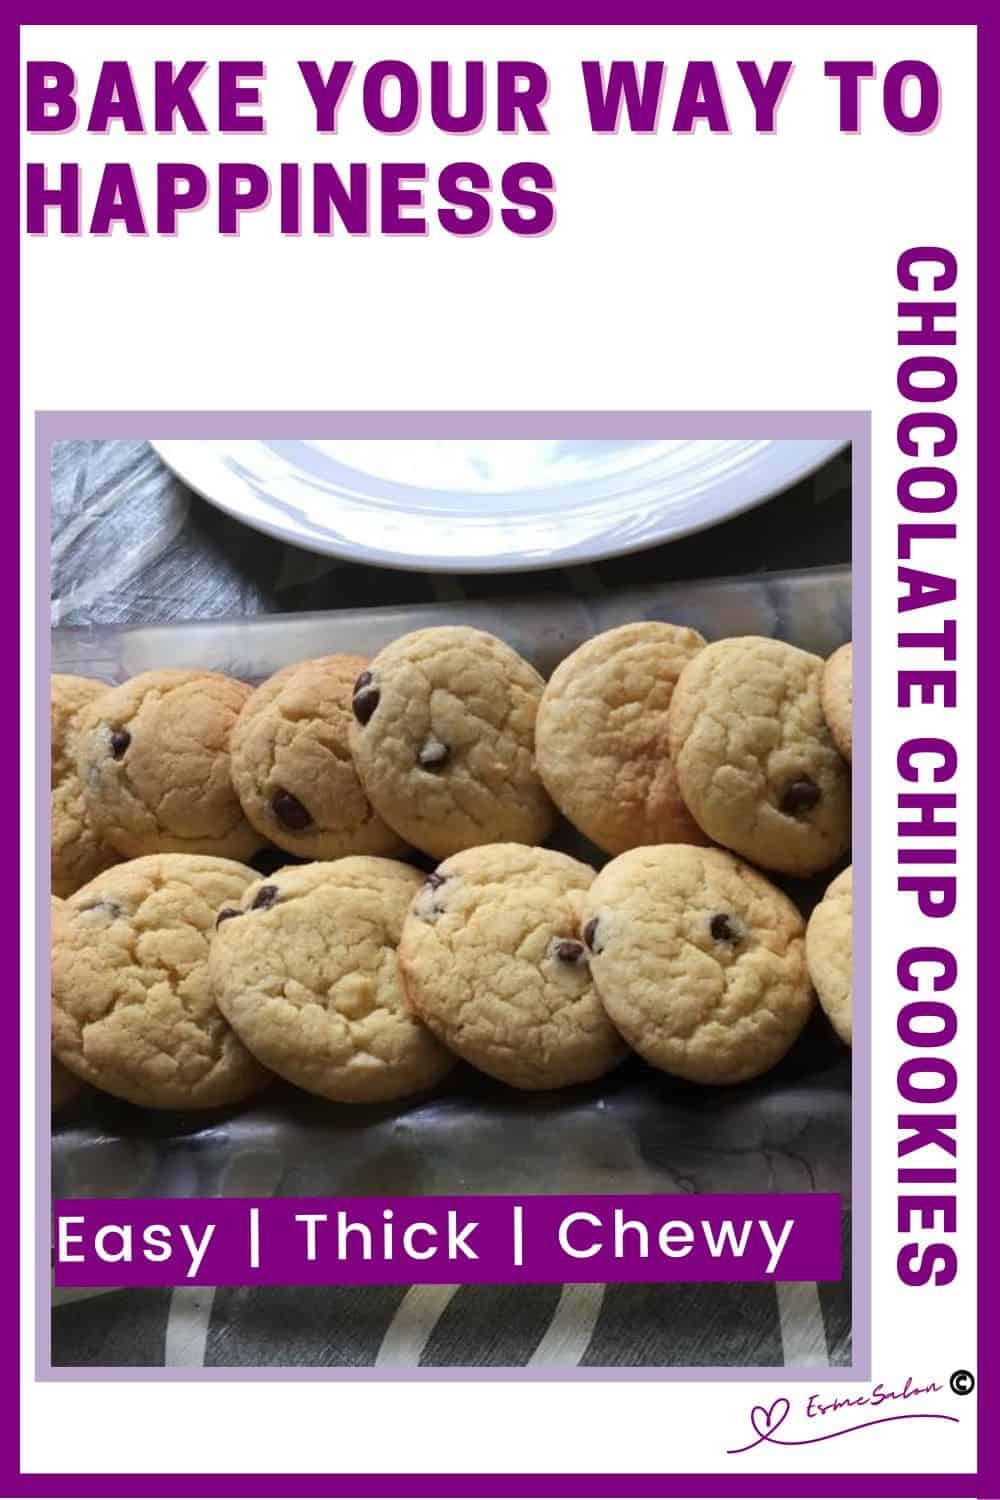 an image of Chocolate Chip Cookies on a glass serving tray stacked in two rows overlapping each other